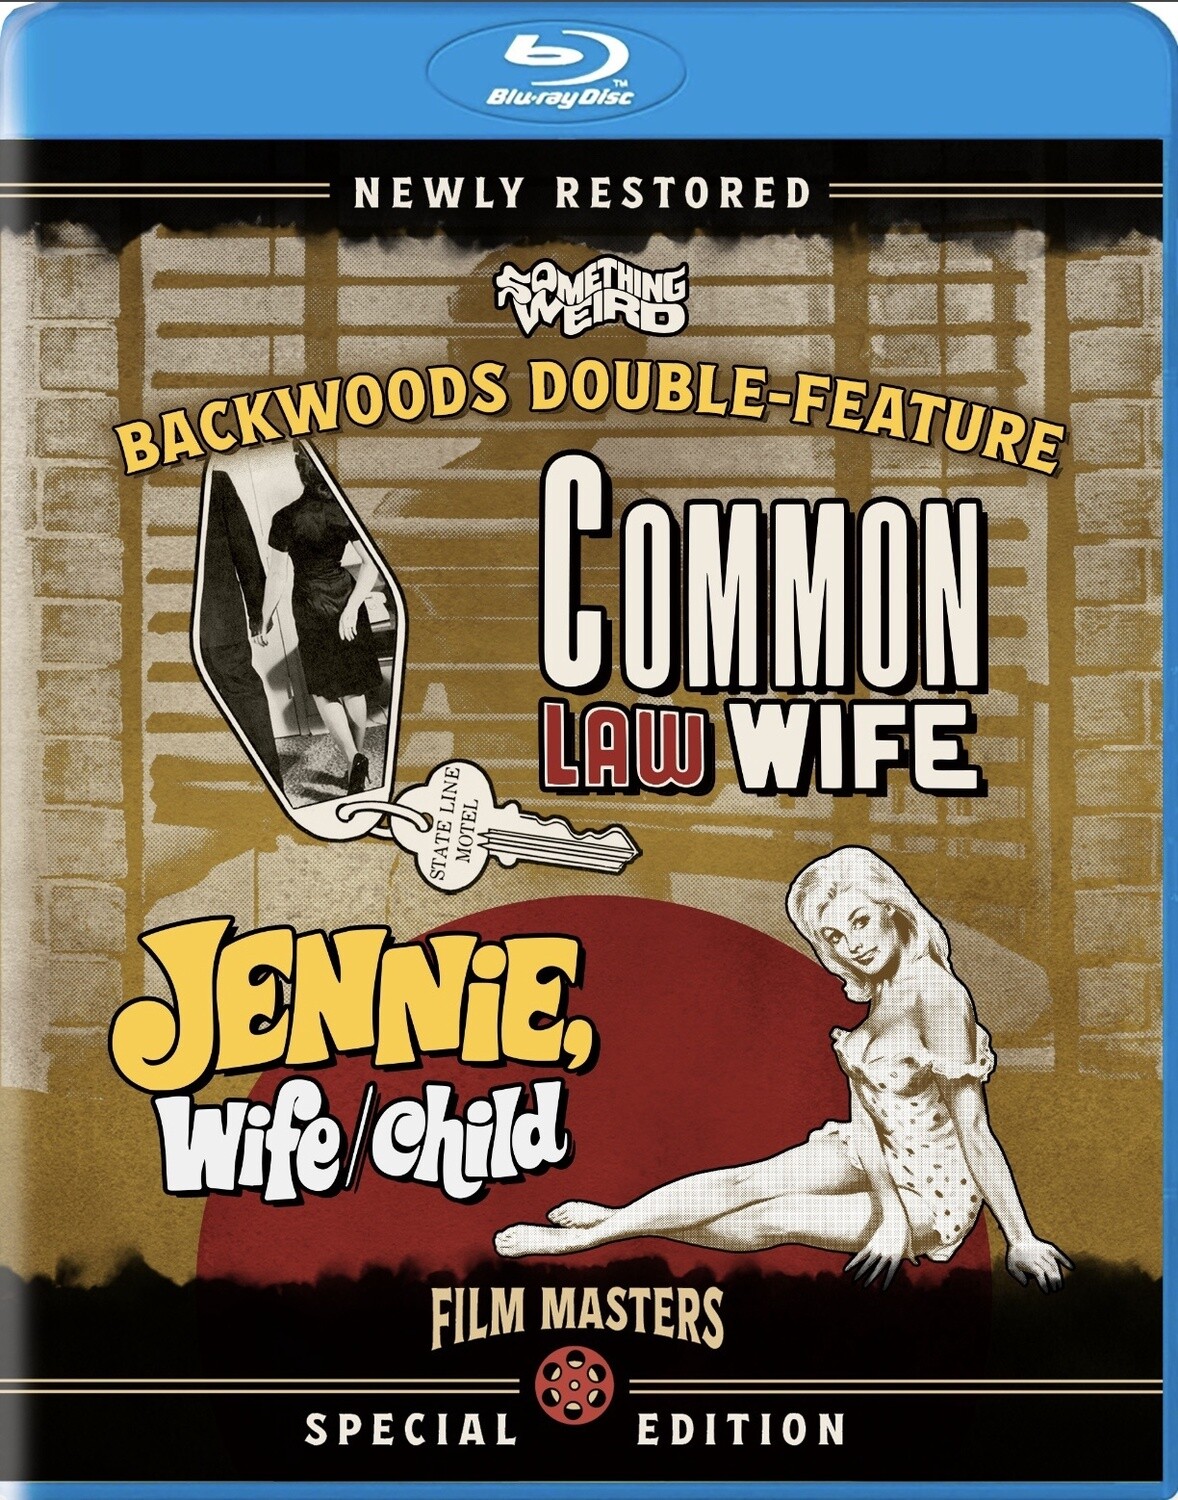 Common Law Wife And Jennie, Wife/Child : Backwoods Double Feature (Blu-ray) ***Preorder*** 6/25